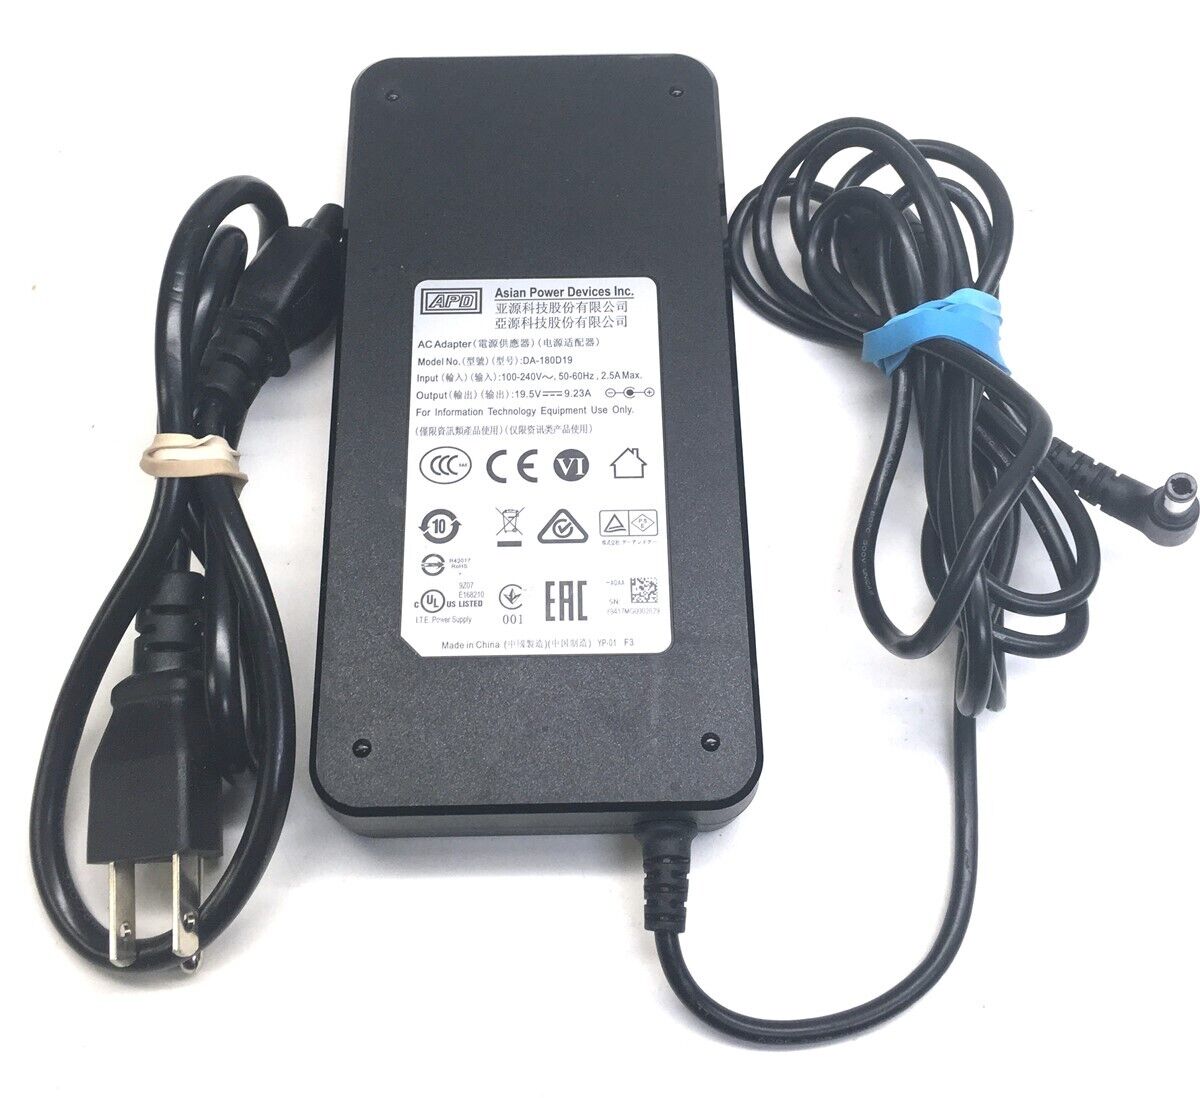 APD AC Adapter Power Supply for Clevo Sager Laptop DA-180D19 19.5V 9.23A 180W Item Condition: Un - Click Image to Close